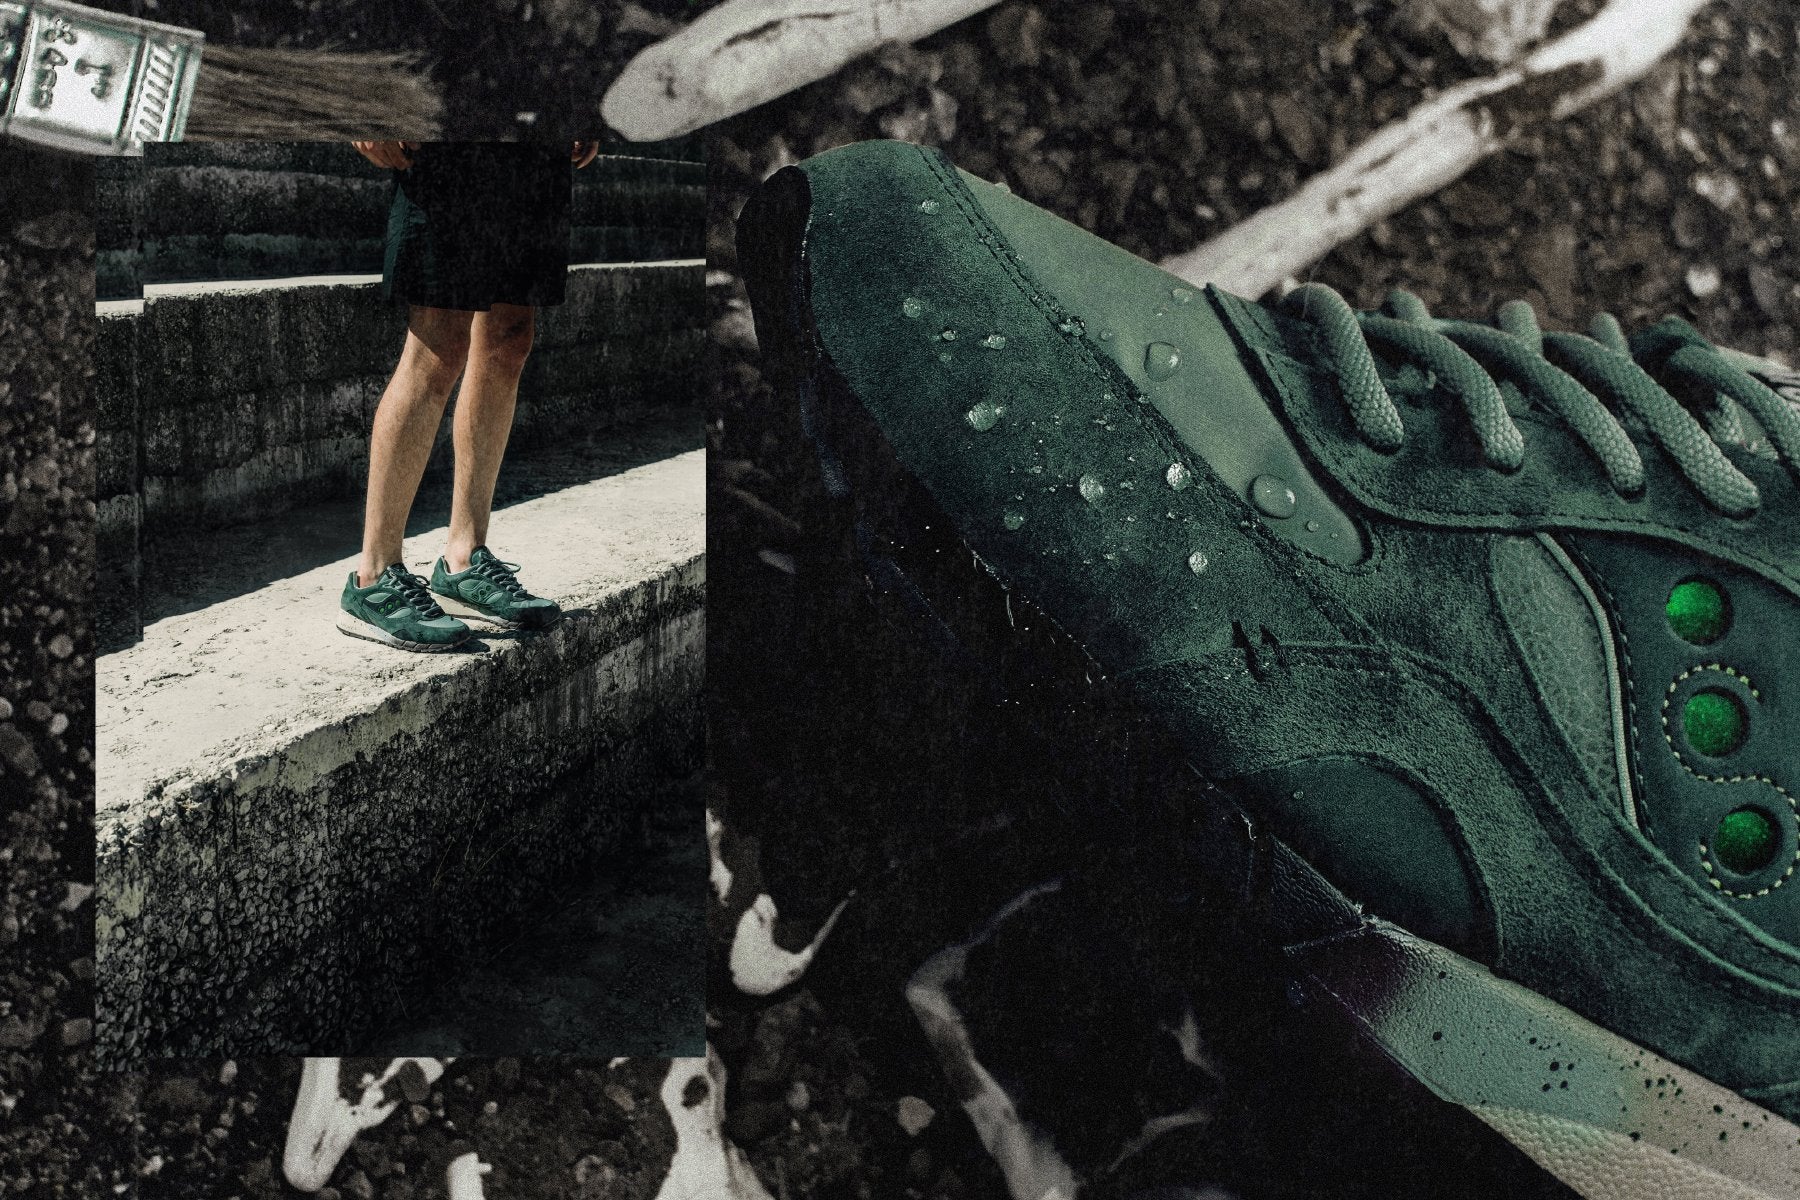 saucony shadow 6 feature living fossil